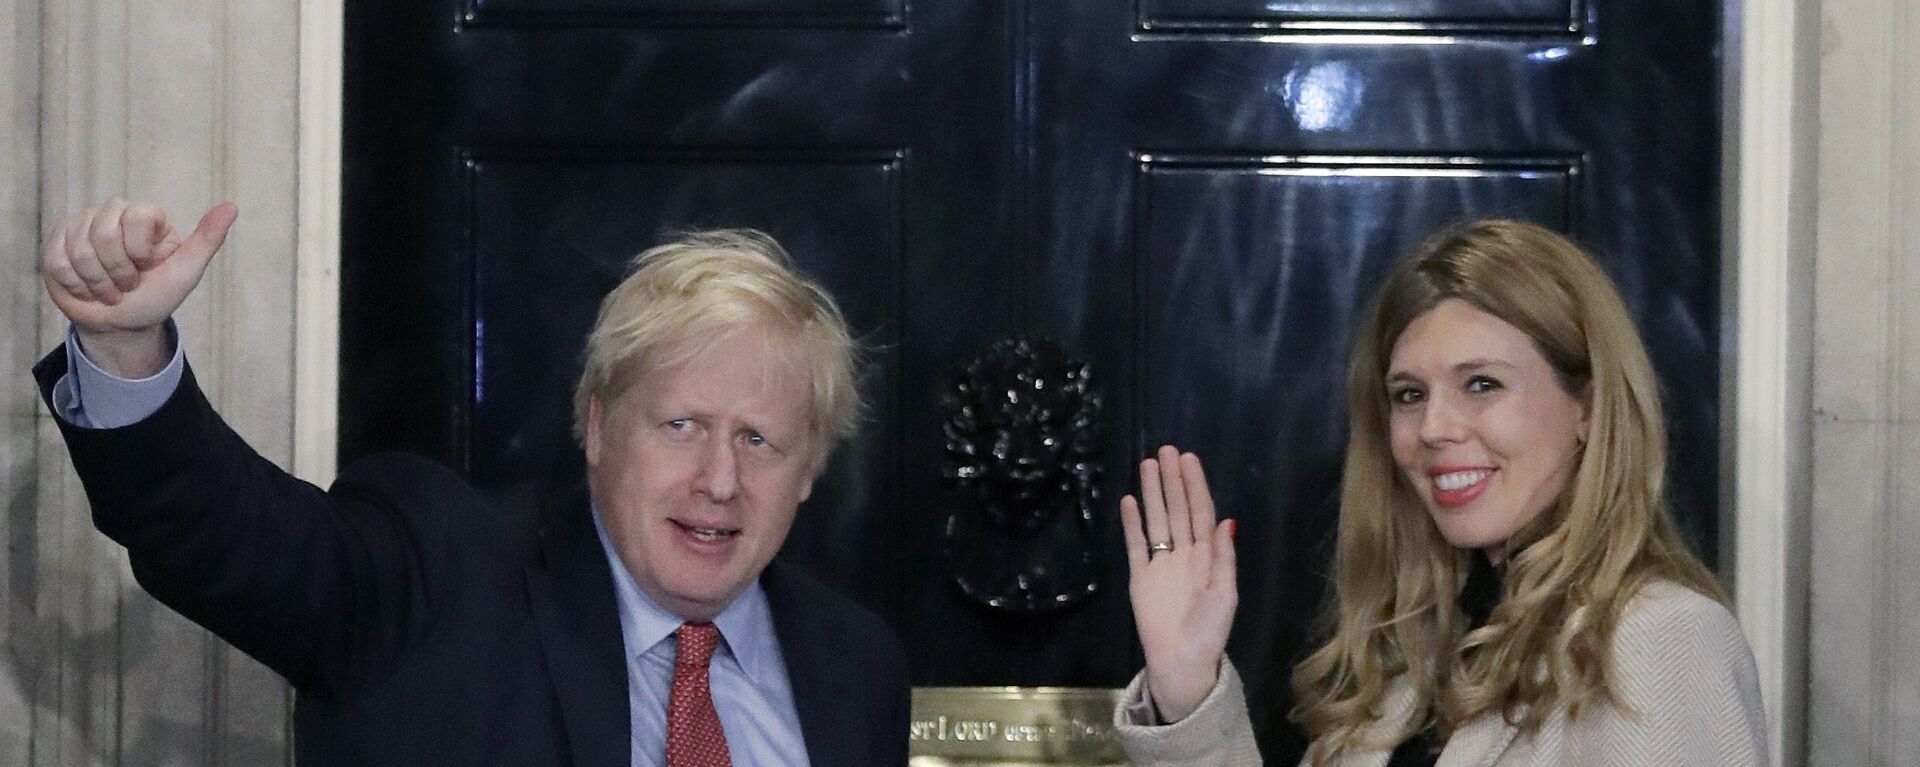 FILE -In this Friday, Dec. 13, 2019 file photo, Britain's Prime Minister Boris Johnson and his partner Carrie Symonds wave from the steps of number 10 Downing Street in London. - Sputnik International, 1920, 16.01.2022